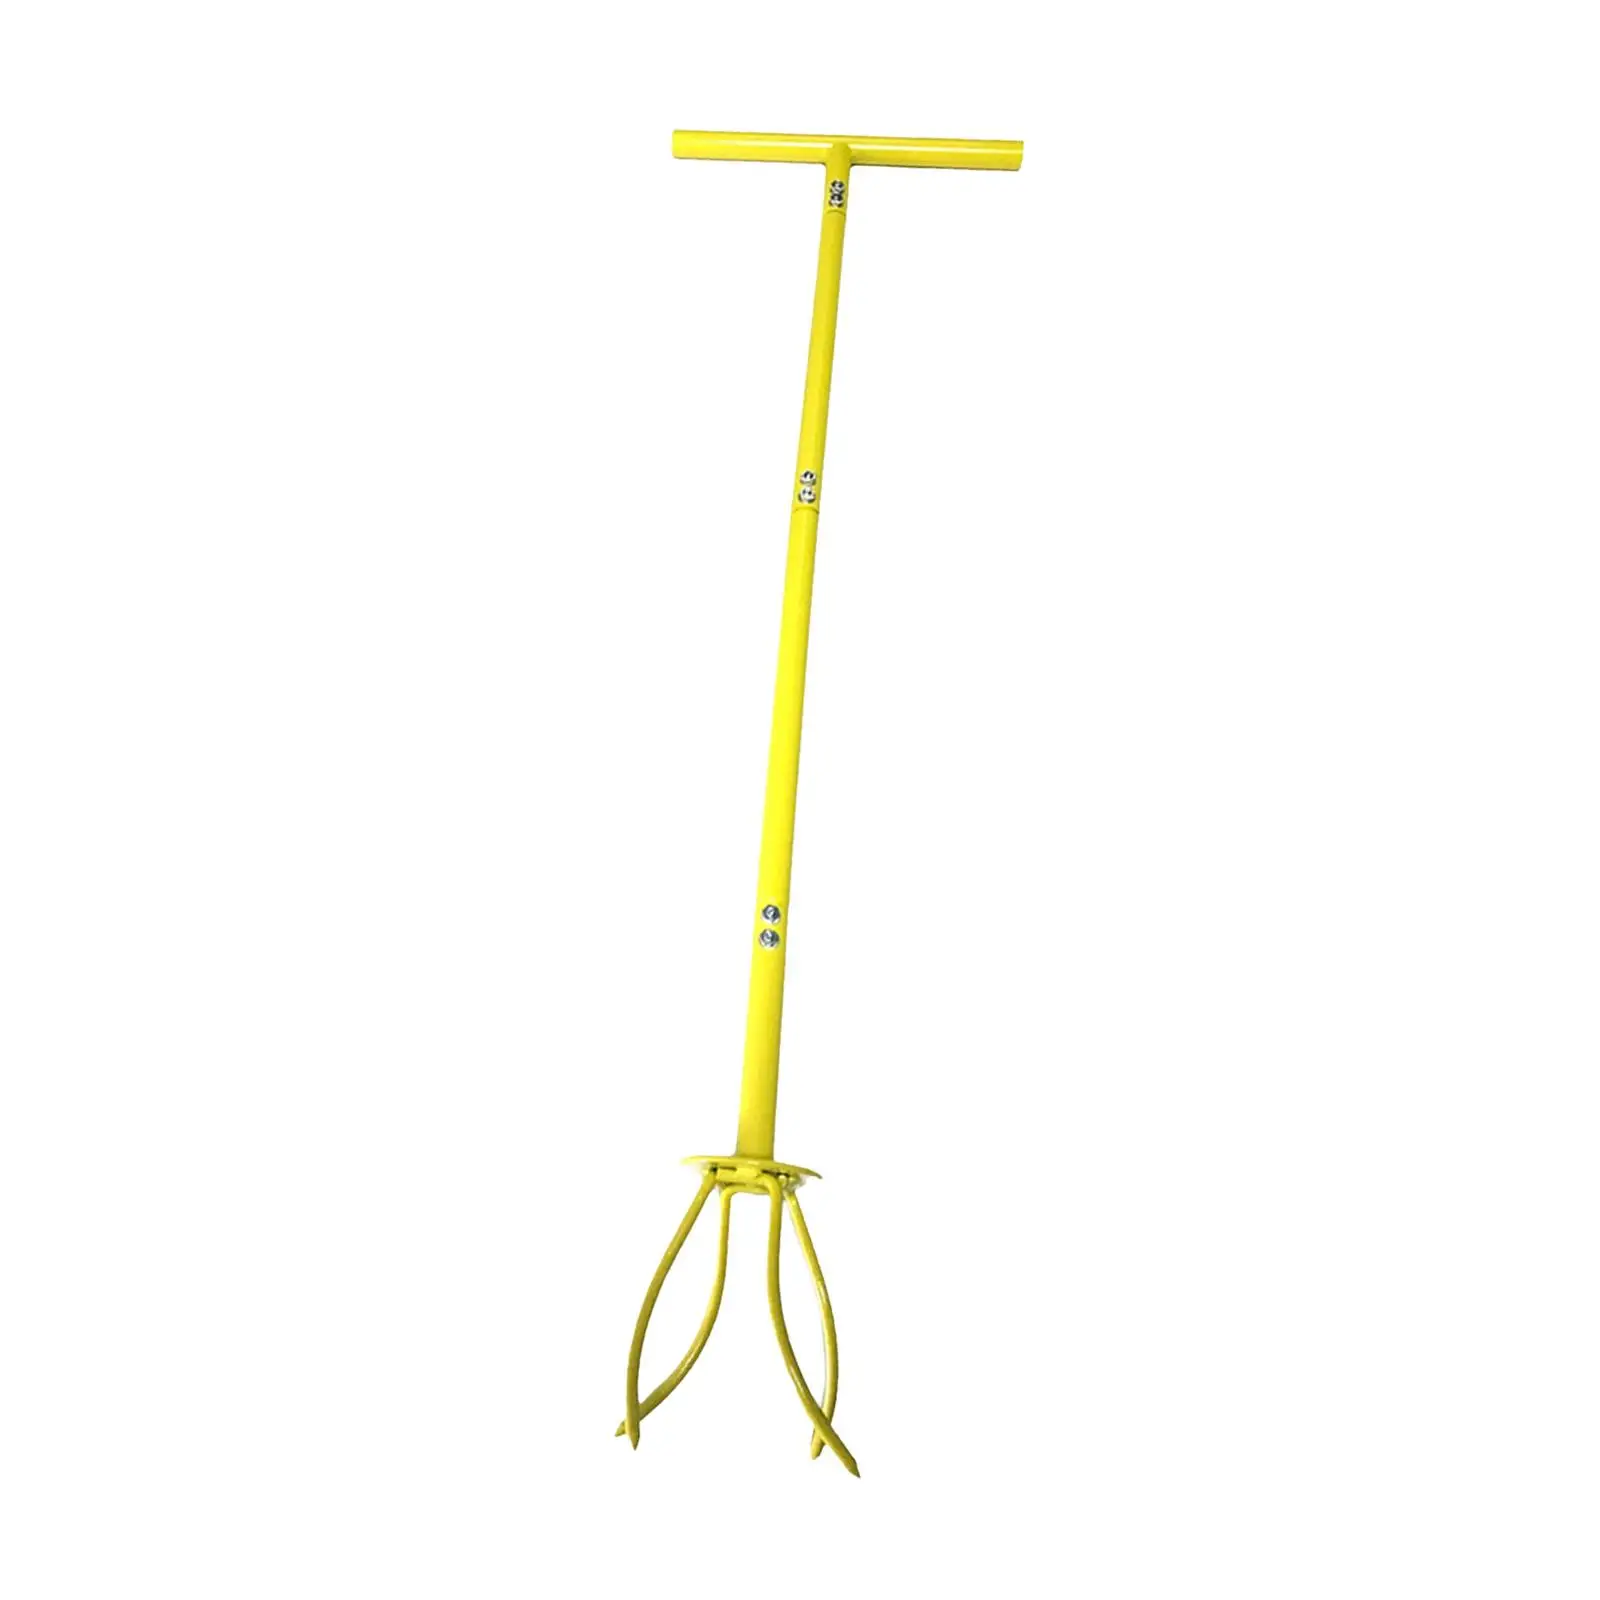 Gardening for Cultivate, Loosen, Aerate Durable Gardening Claw Cultivator